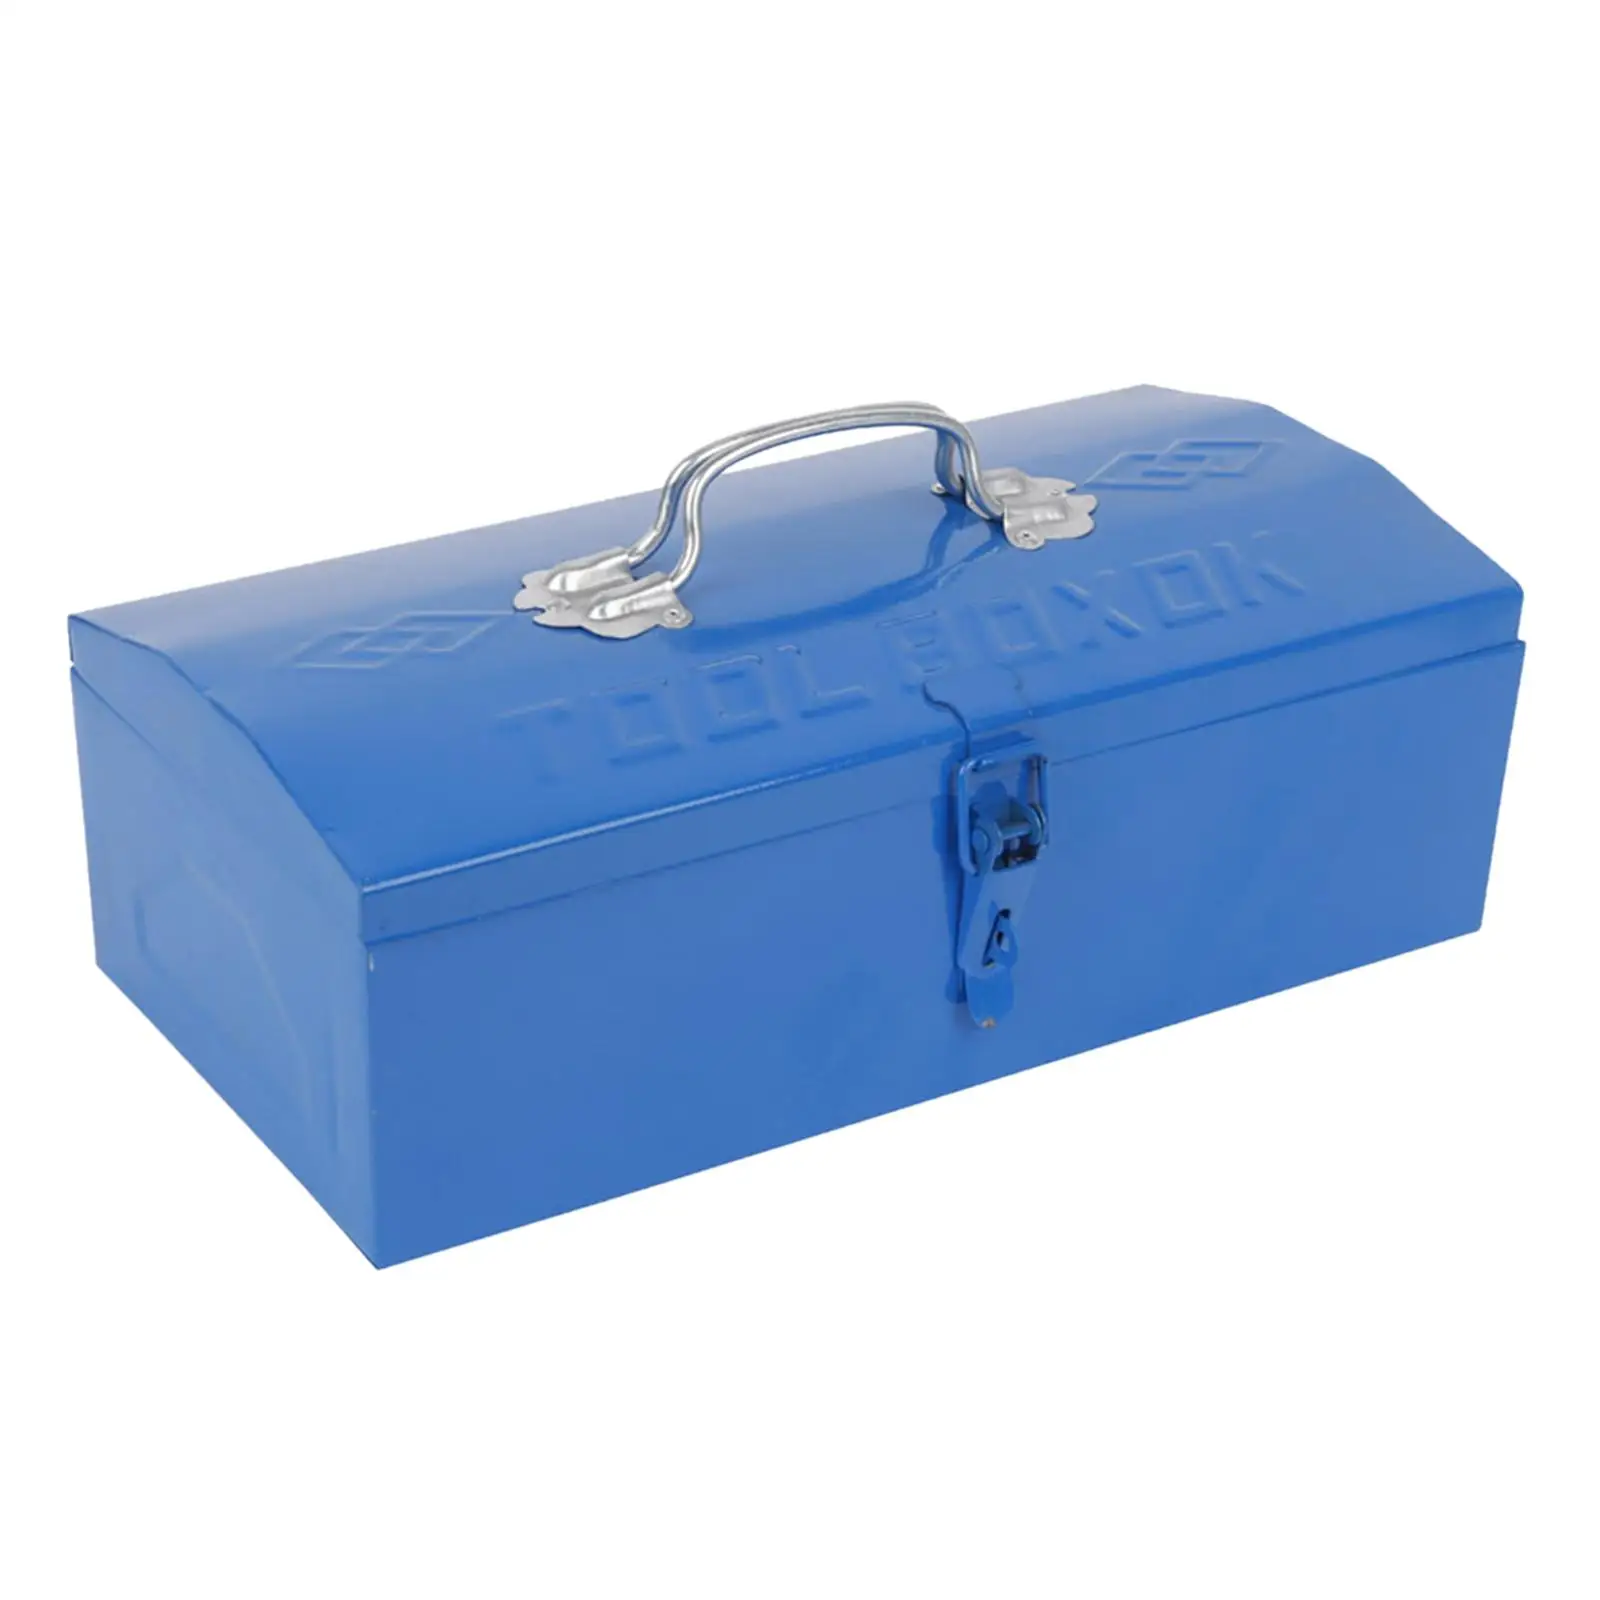 Iron Tool Box with Folding Handle Large Capacity Heavy Duty Multipurpose Portable Tool Storage Box Tool Case for Garage Workshop